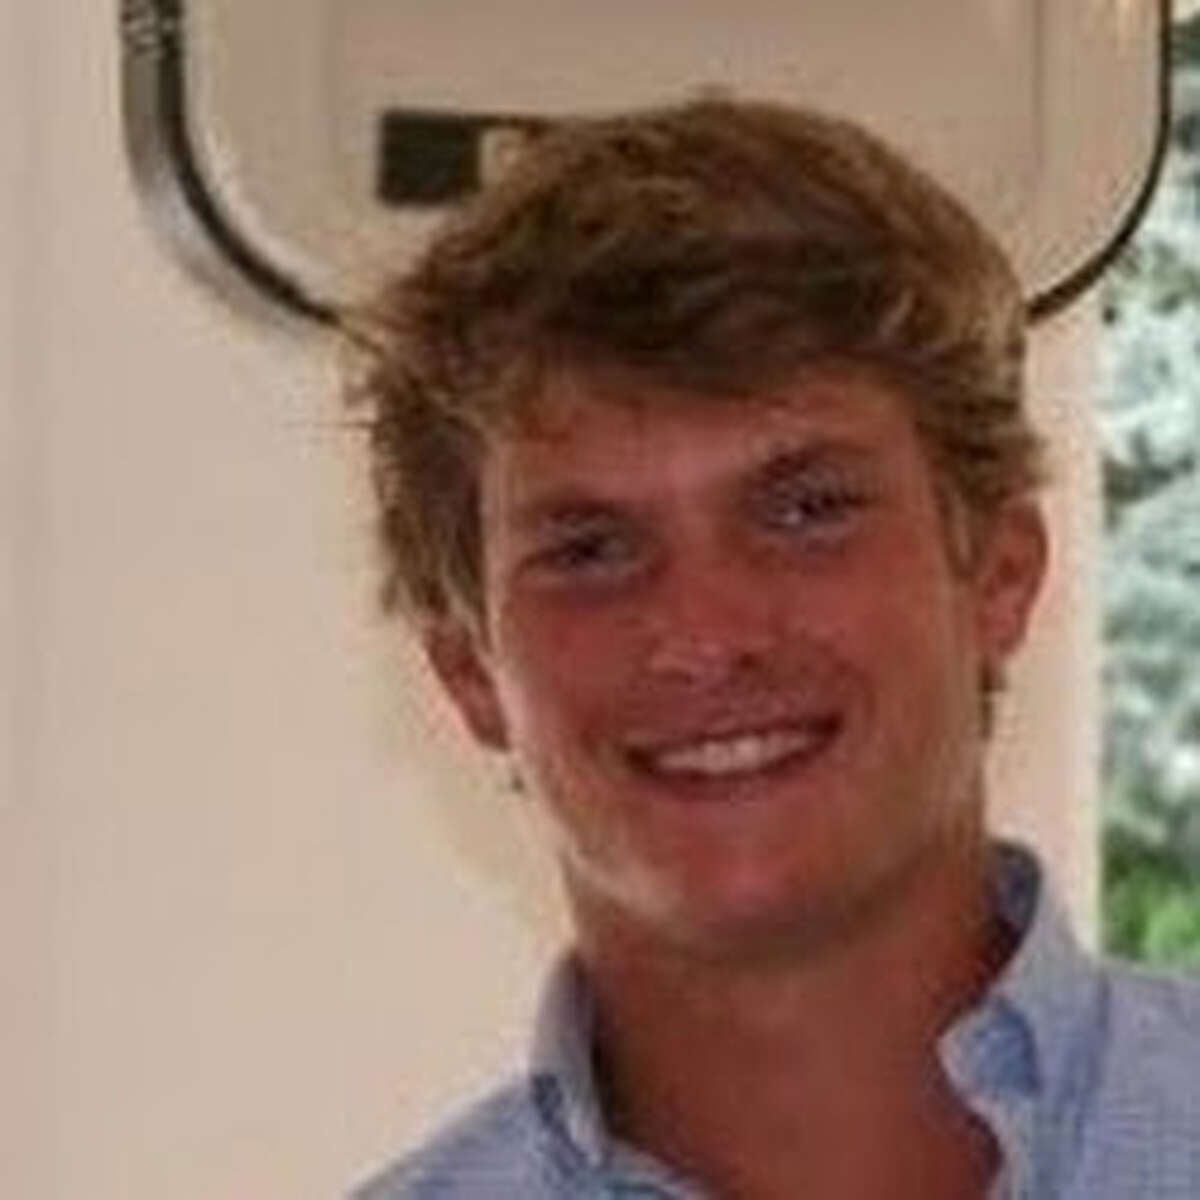 Spencer Pitts, 23, a College of Charleston (S.C.) senior from Greenwich, died Sunday morning, April 15, 2012, after falling from the third-story roof of a house near campus, police said.